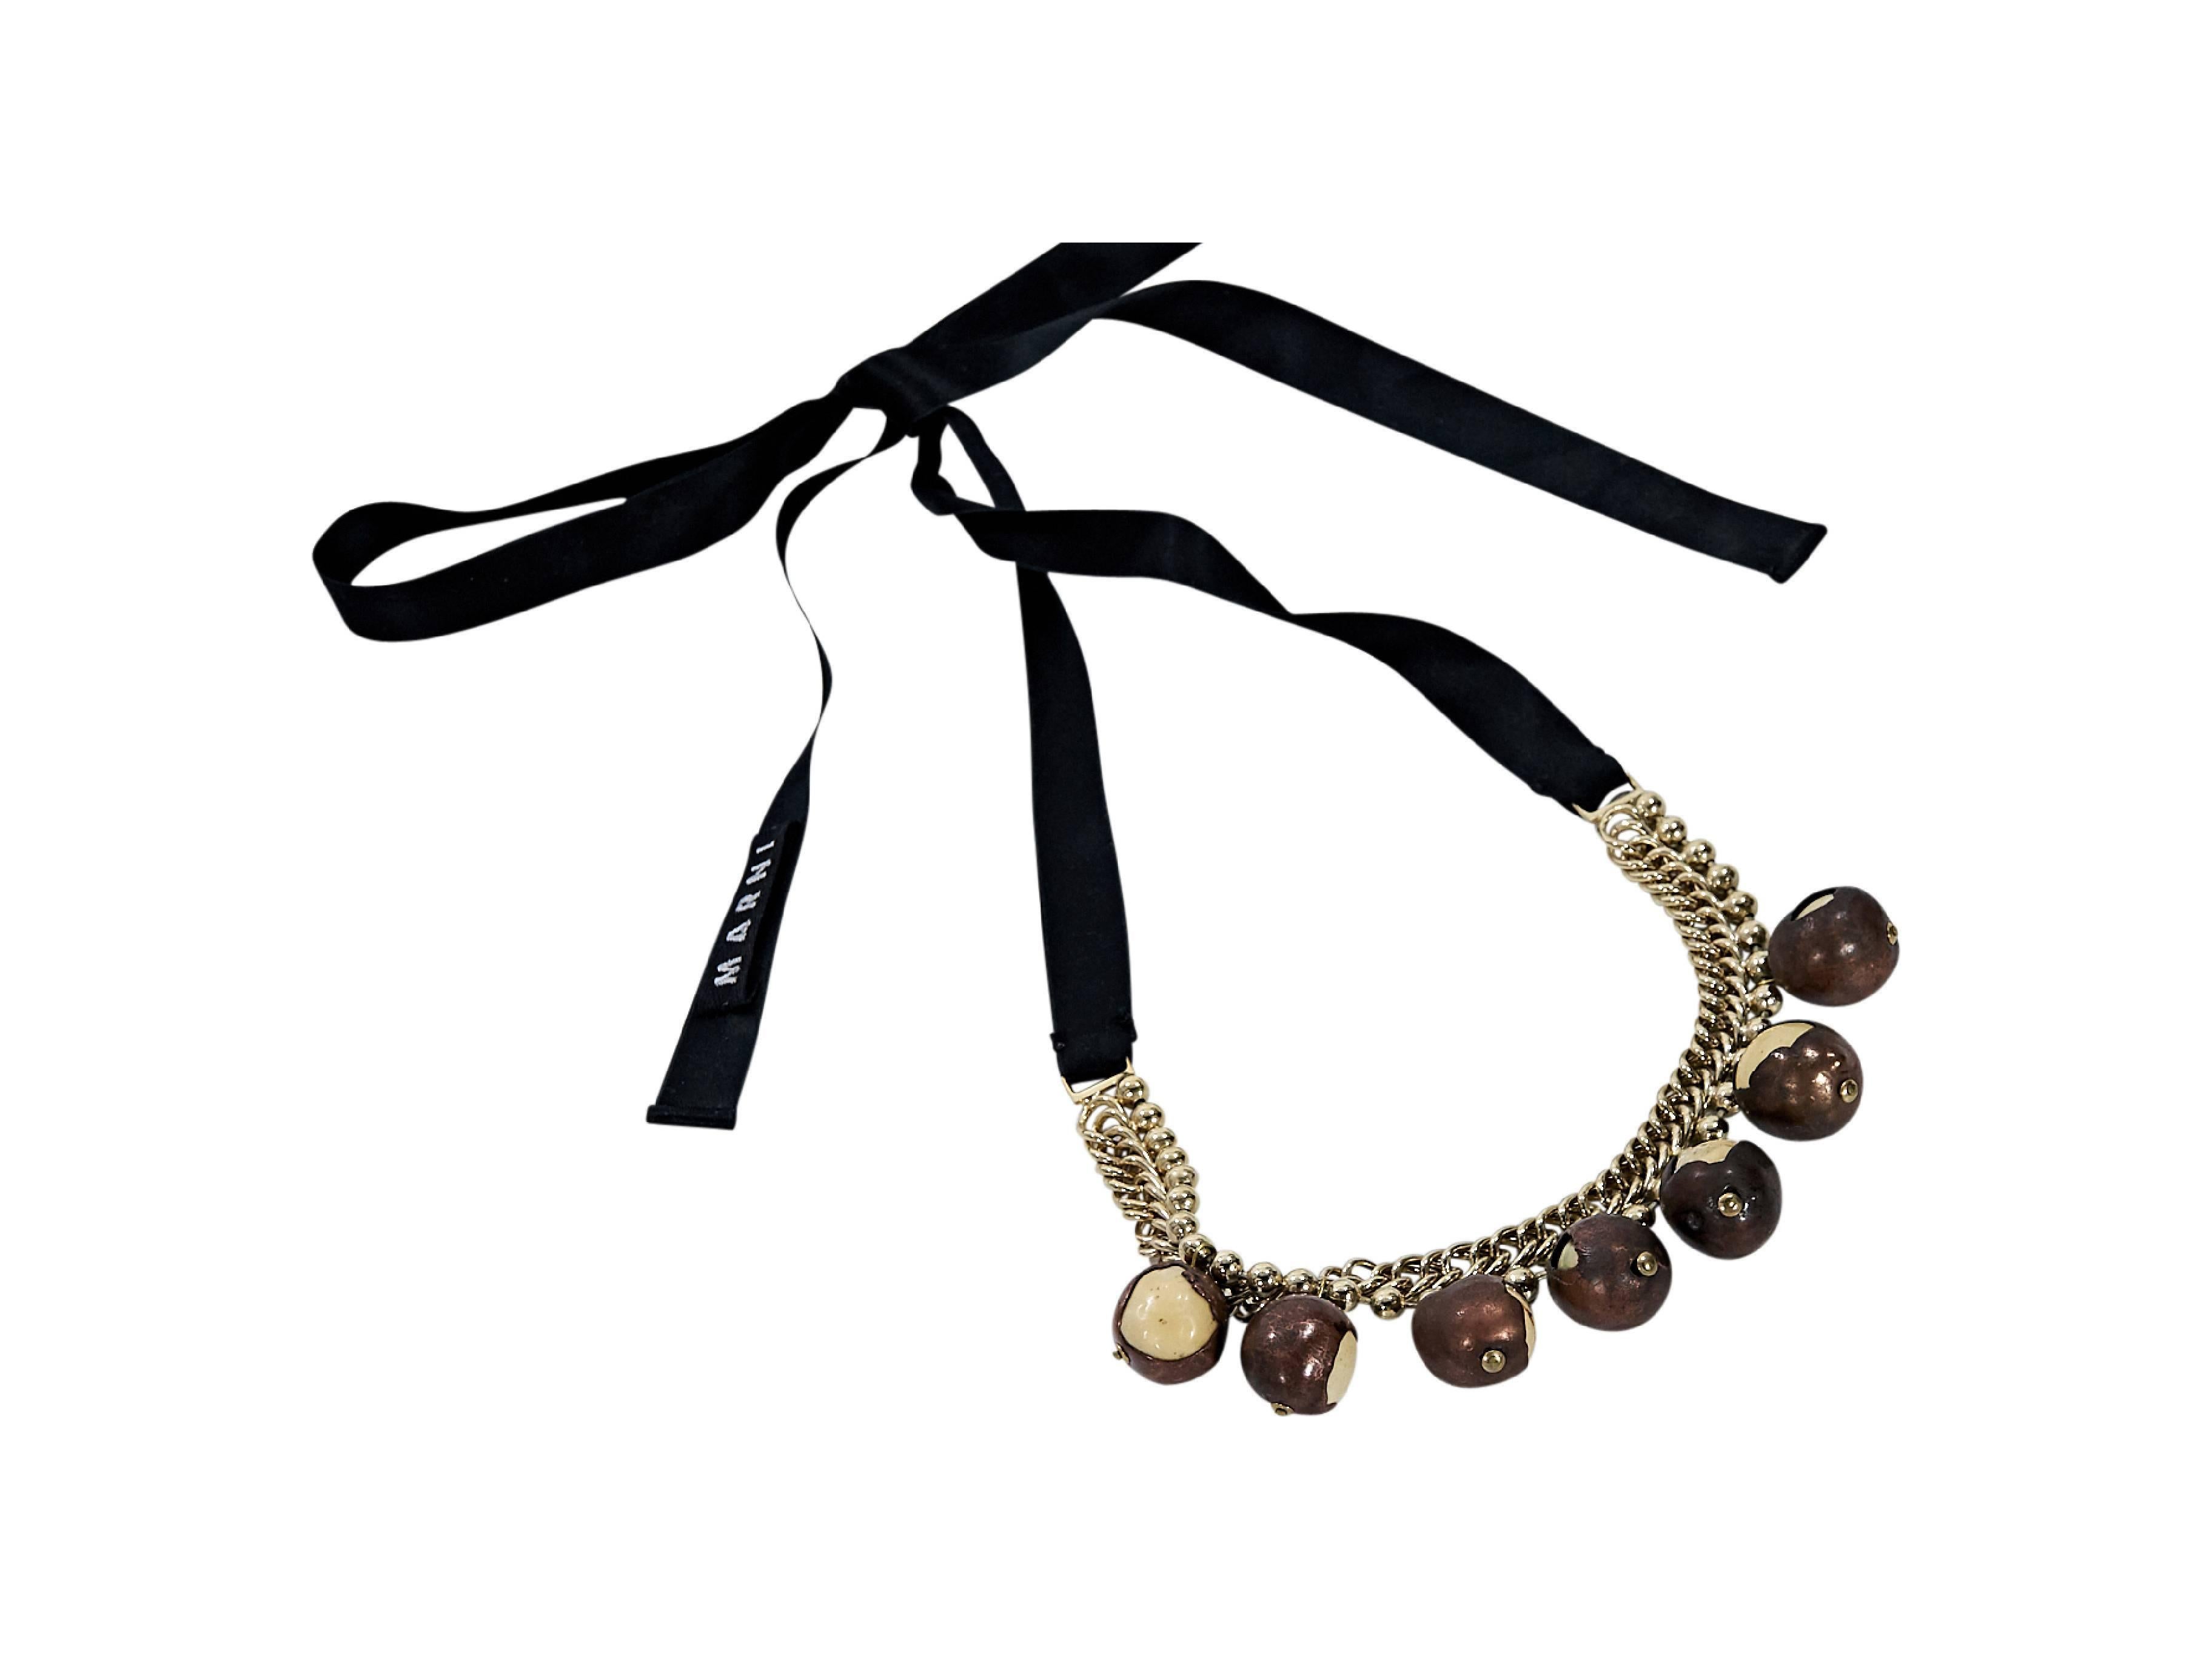 Product details:  Single strand beaded necklace by Marni.  Hanging brown resin beads.  Adjustable self-tie closure.  Goldtone hardware. 
Condition: Pre-owned. Very good.

Est. Retail $ 675.00